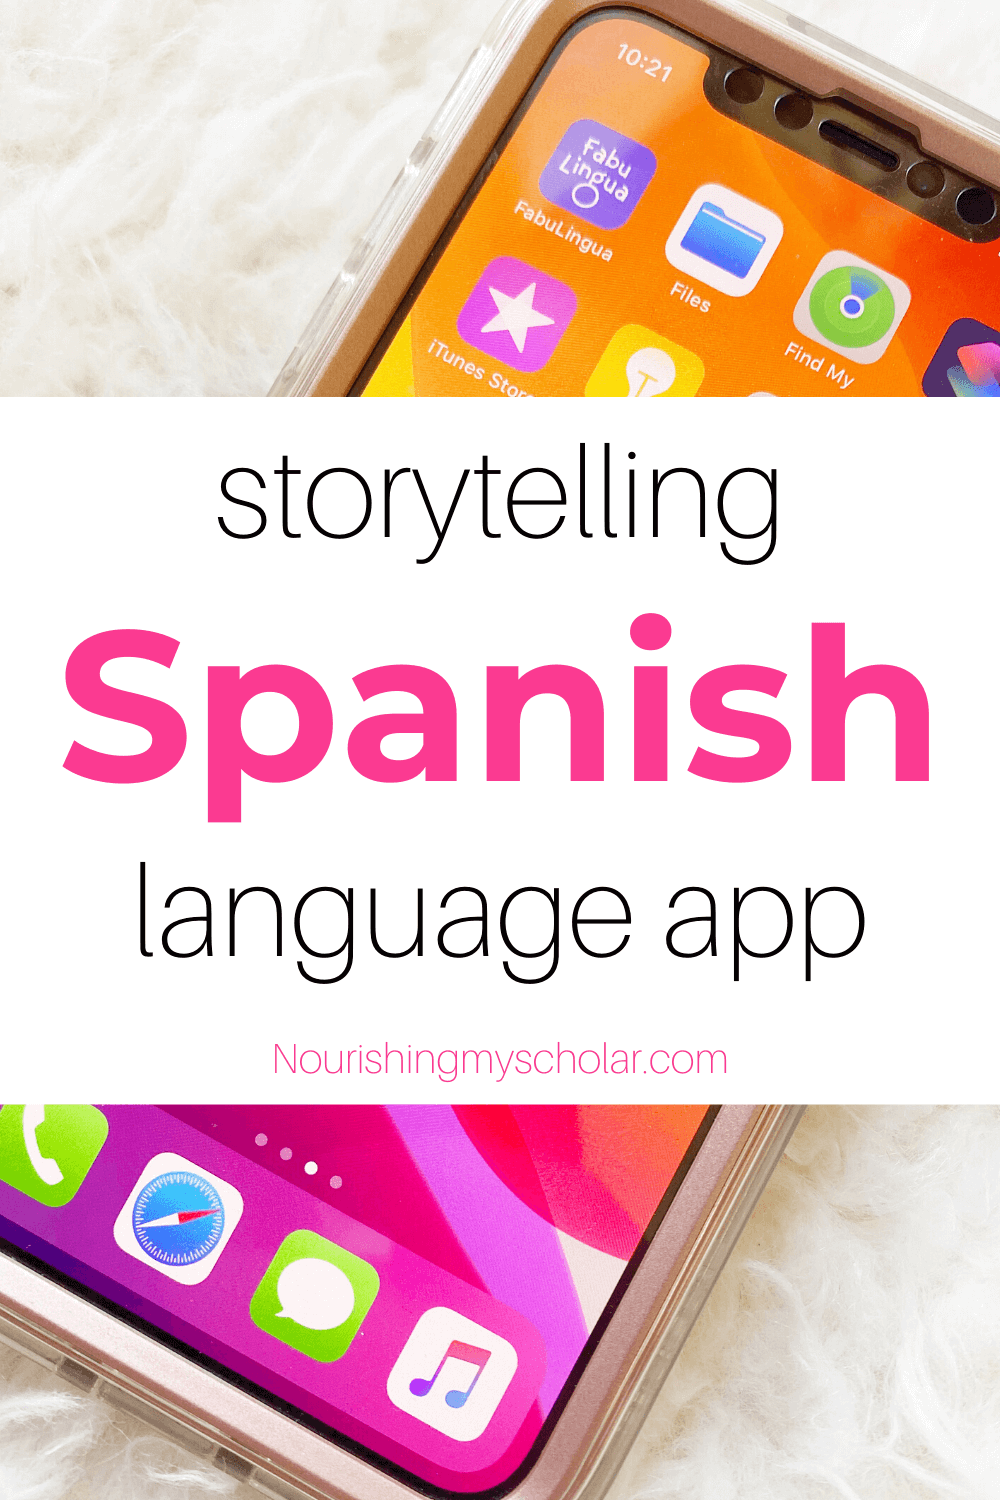 Storytelling Spanish Language App: FabuLingua - For parents wanting to raise bilingual children, here is an interactive Spanish language app that uses the power of storytelling to engage kiddos in a second language! #appsforkidseducational #appsforkids #Spanishforkids #FabuLingua #Spanish #Applearning #Appforkids #education #homeschool #Spanishlanguage